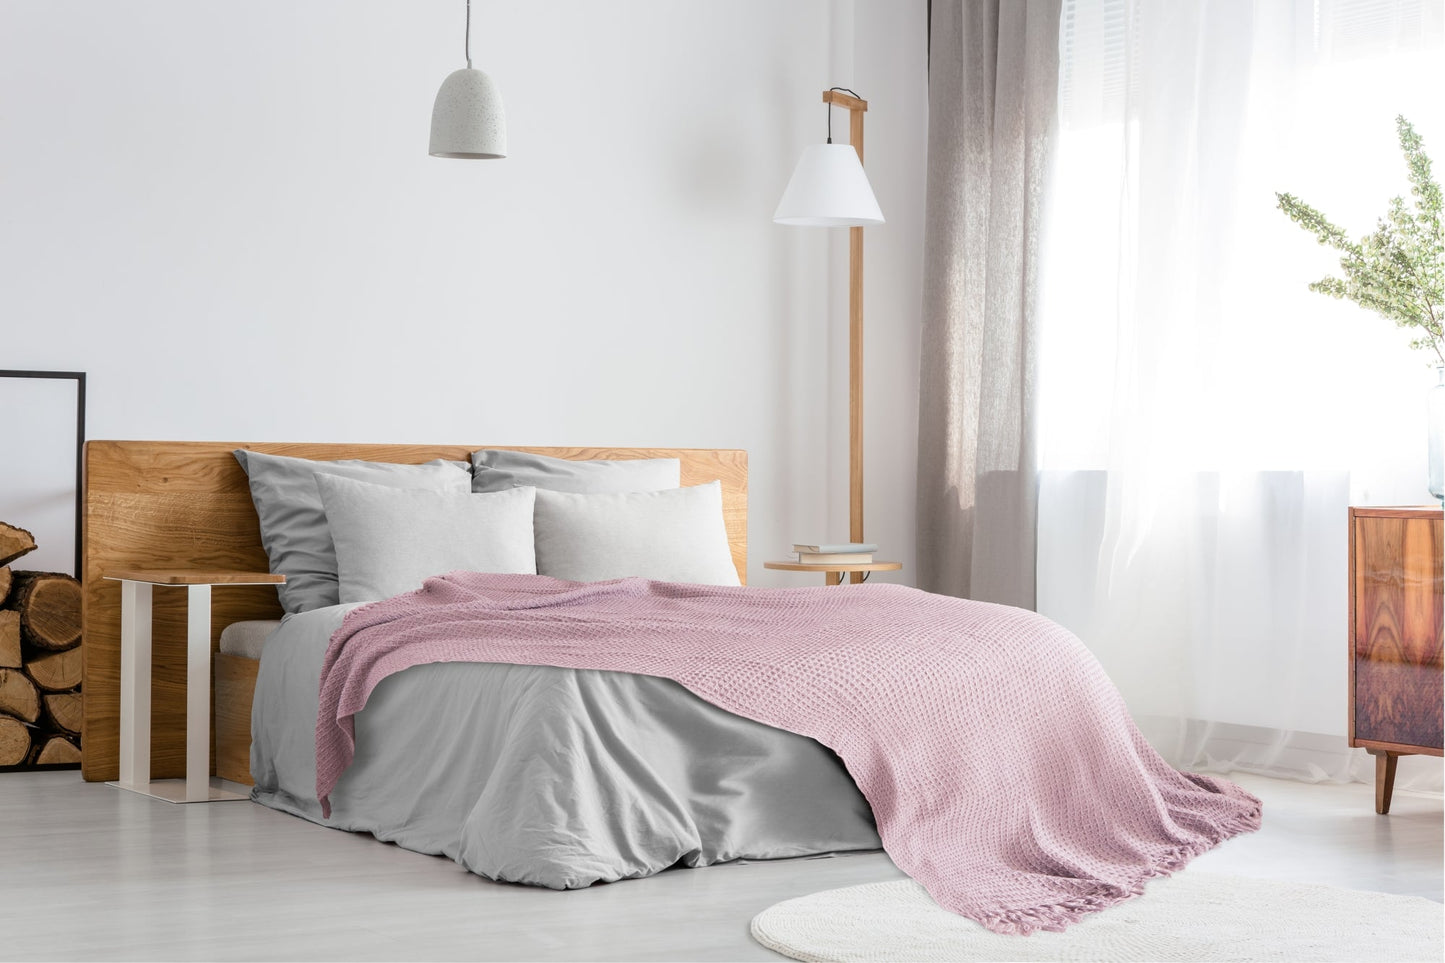 Blush Pink Honeycomb Recycled Cotton Throw